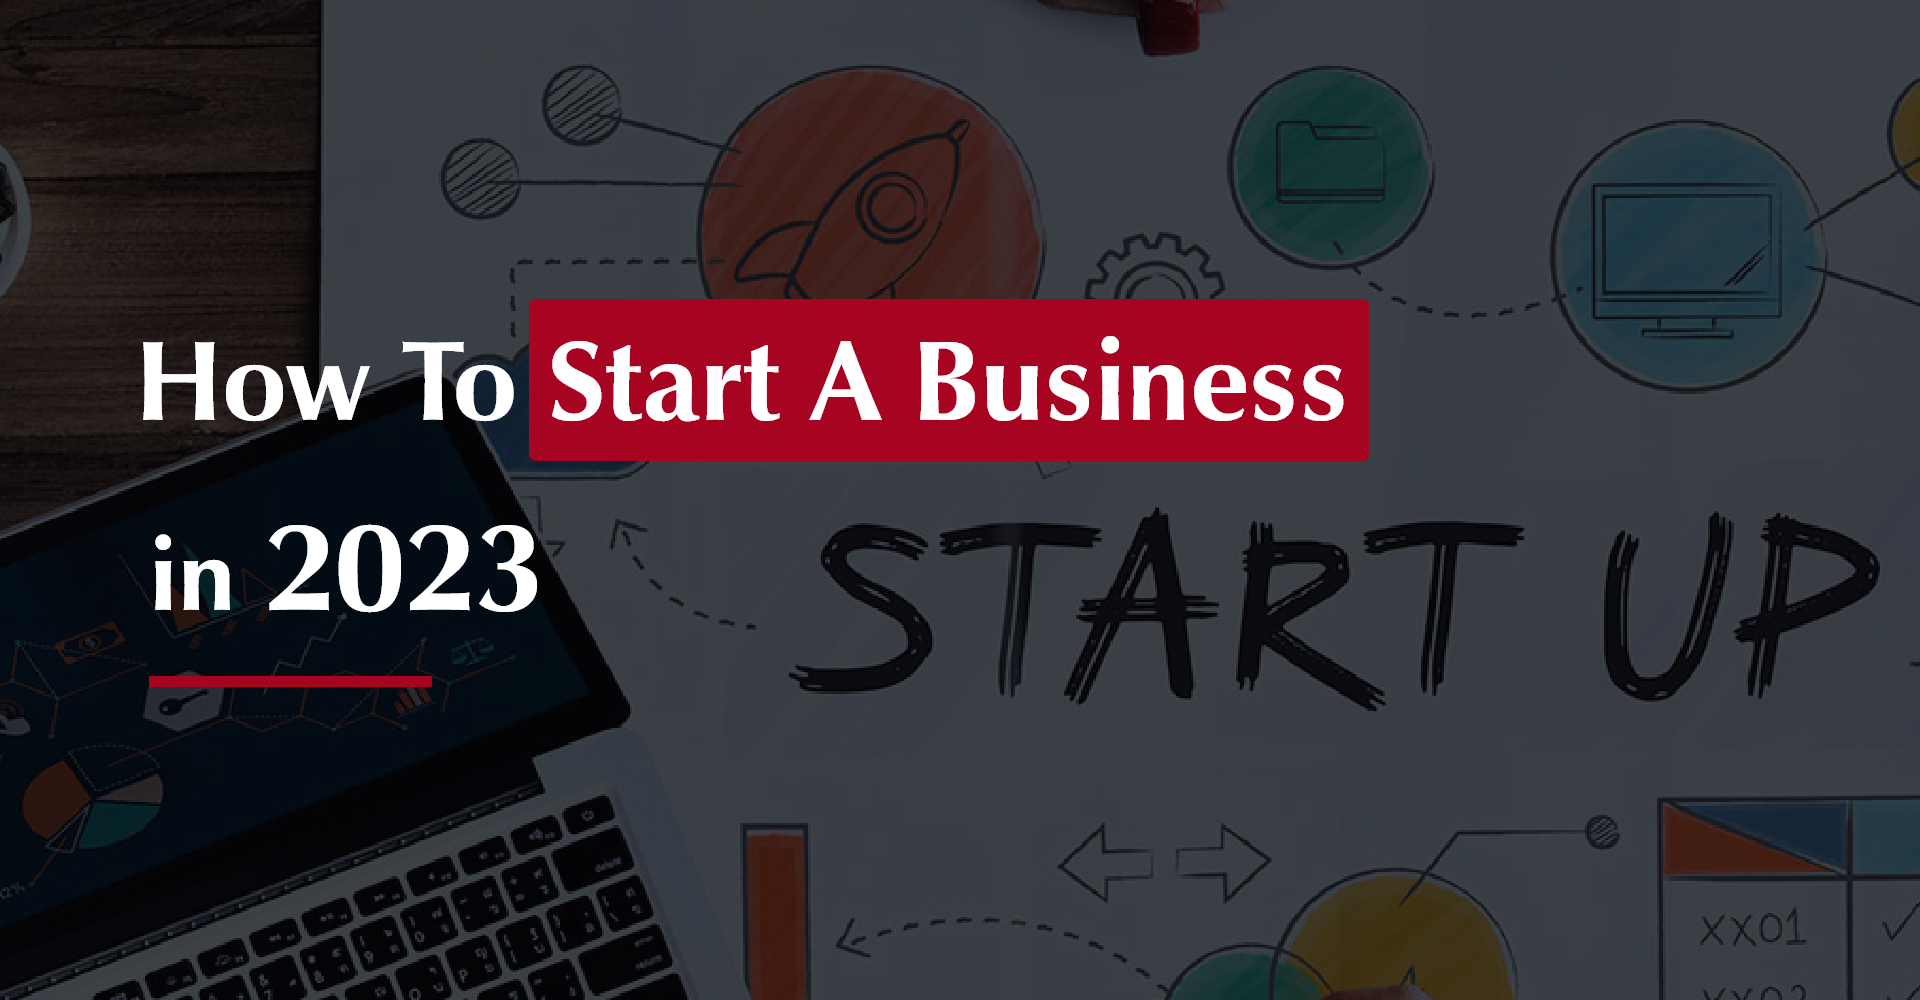 How to start a business in 2023.